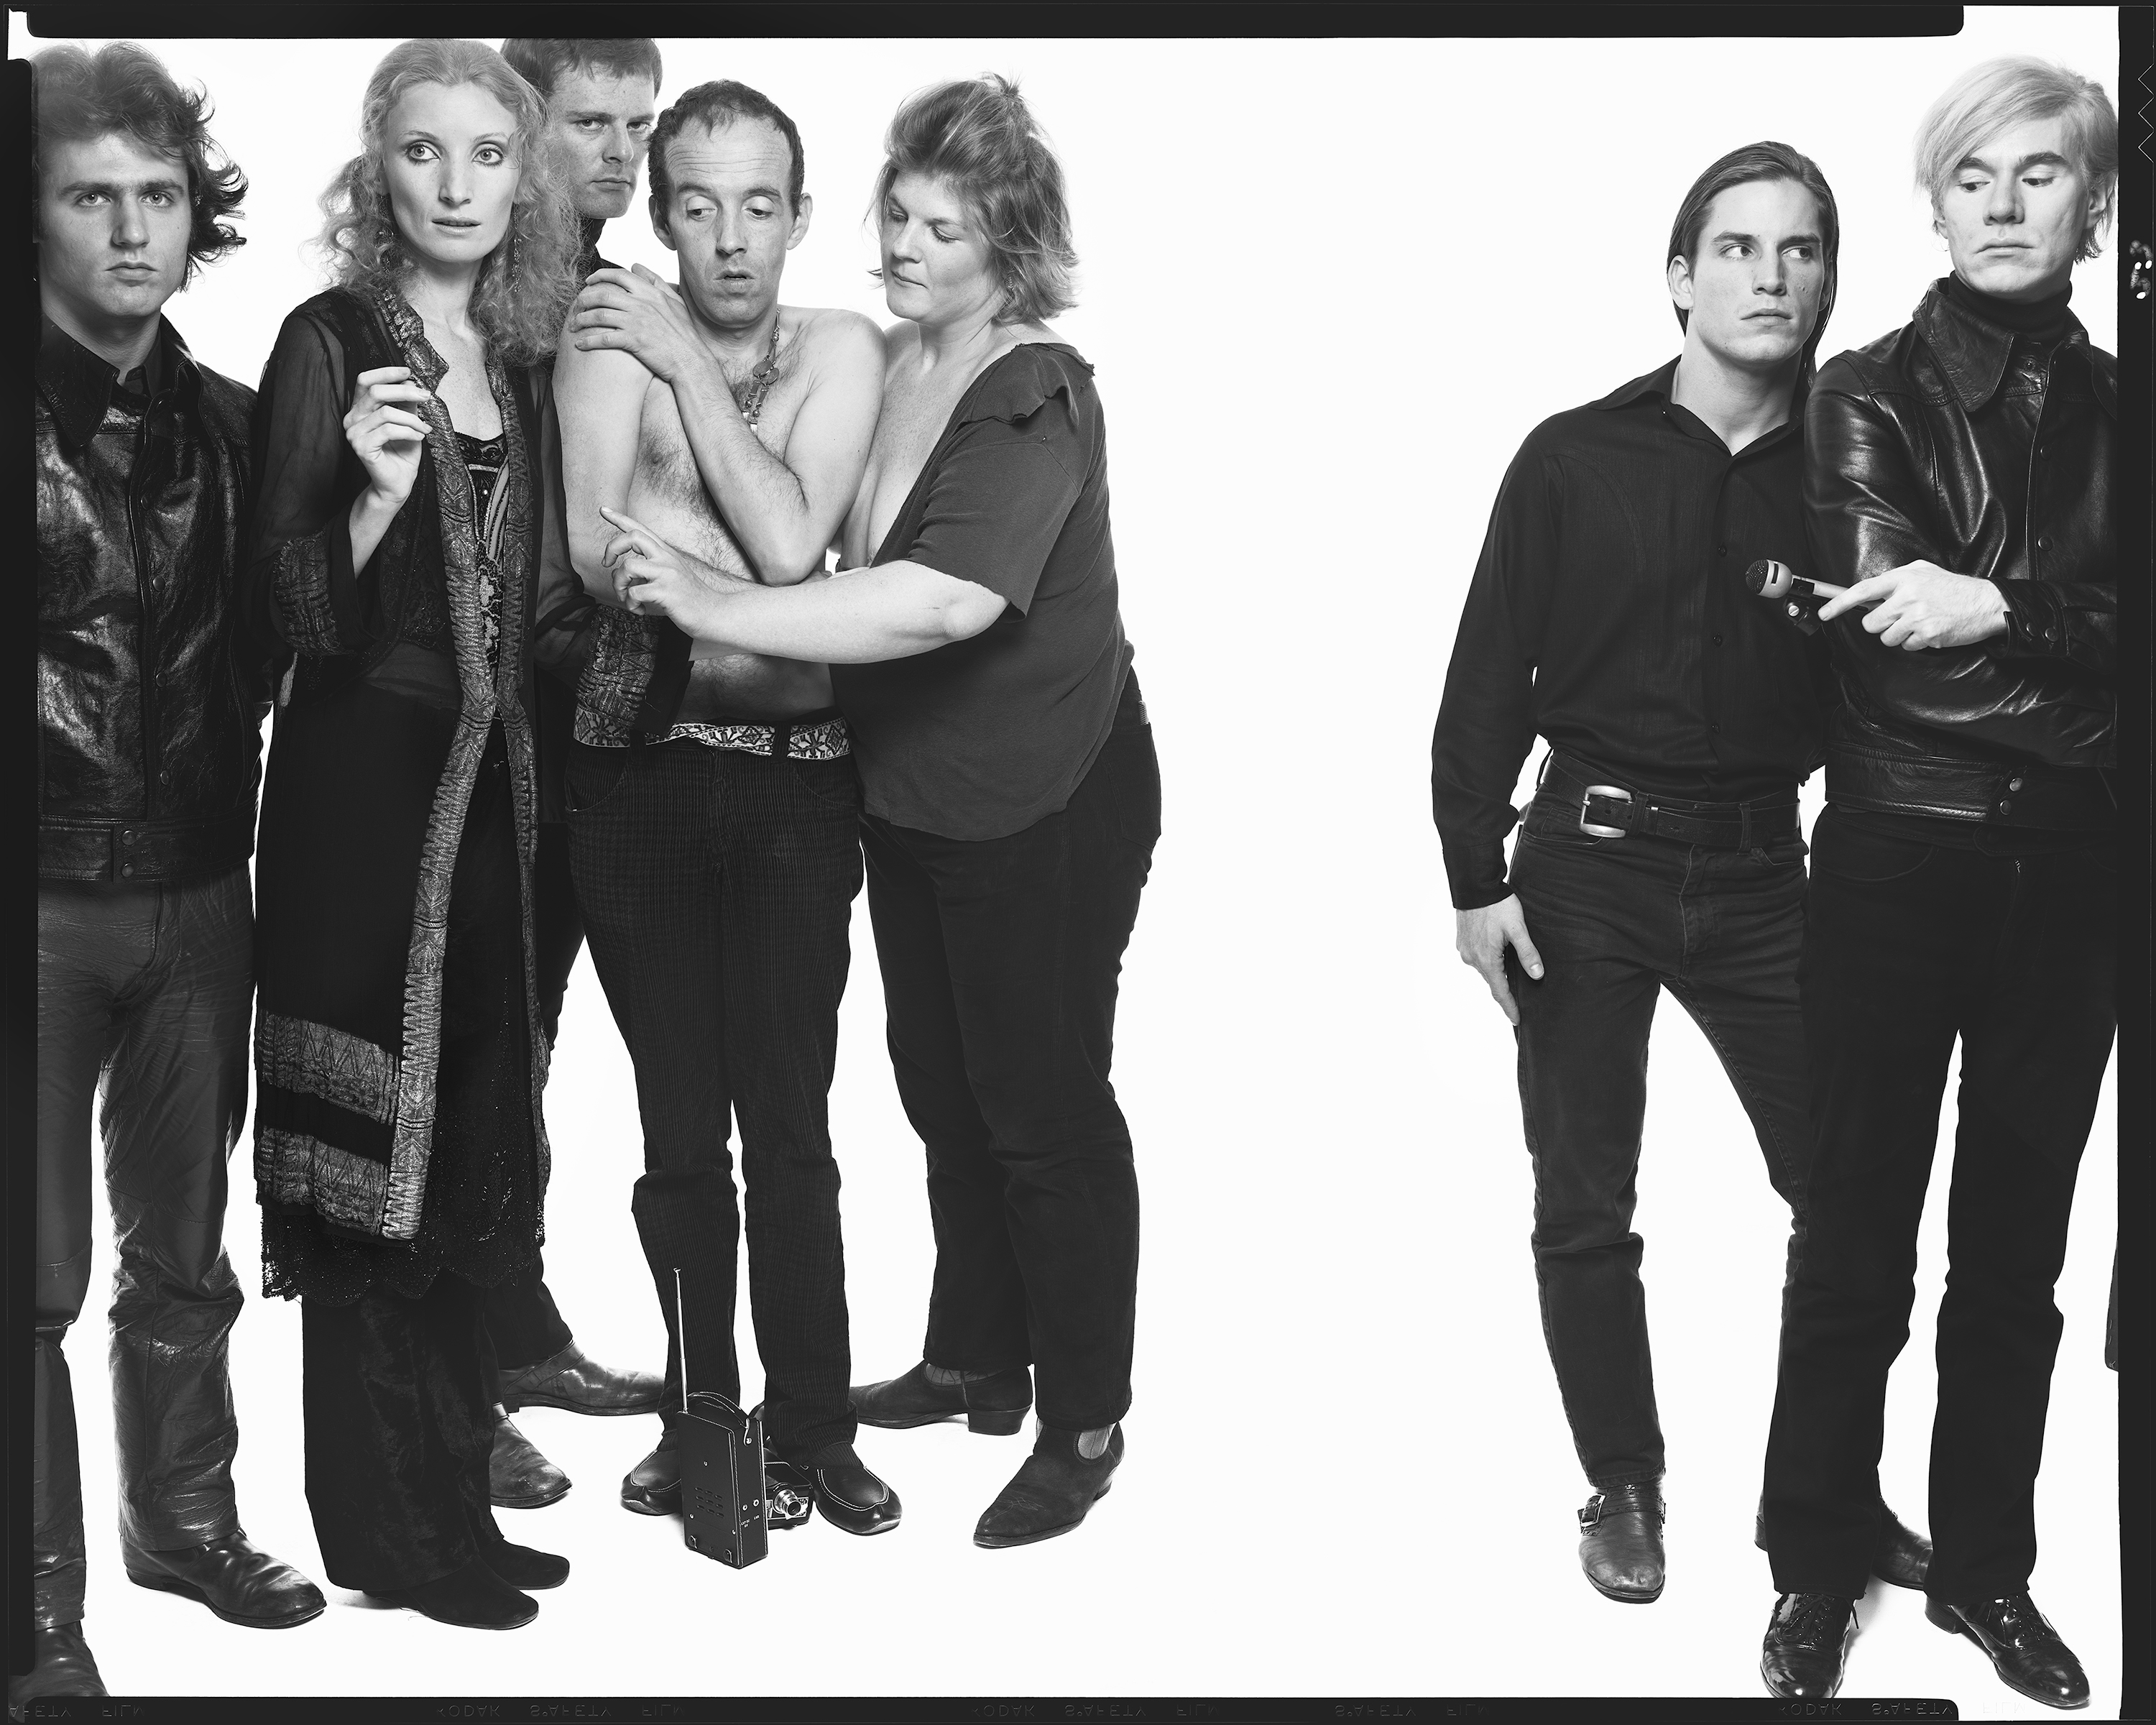 richard_avedon_outtake_from_andy_warhol_and_members_of_the_factory_october_9_1969_s.jpg